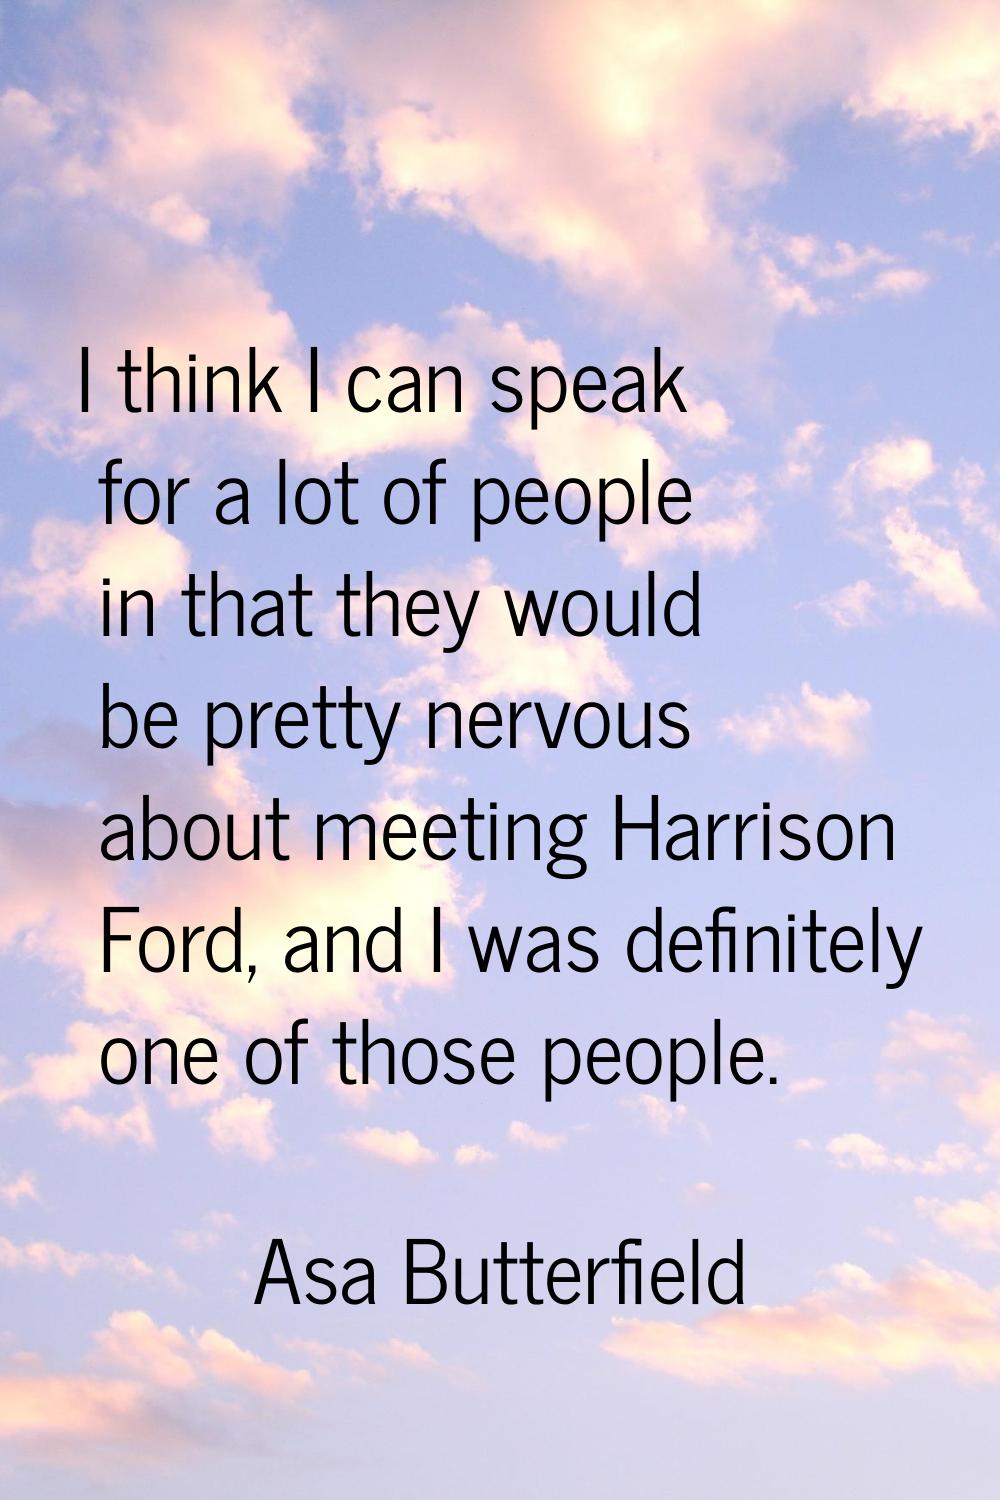 I think I can speak for a lot of people in that they would be pretty nervous about meeting Harrison